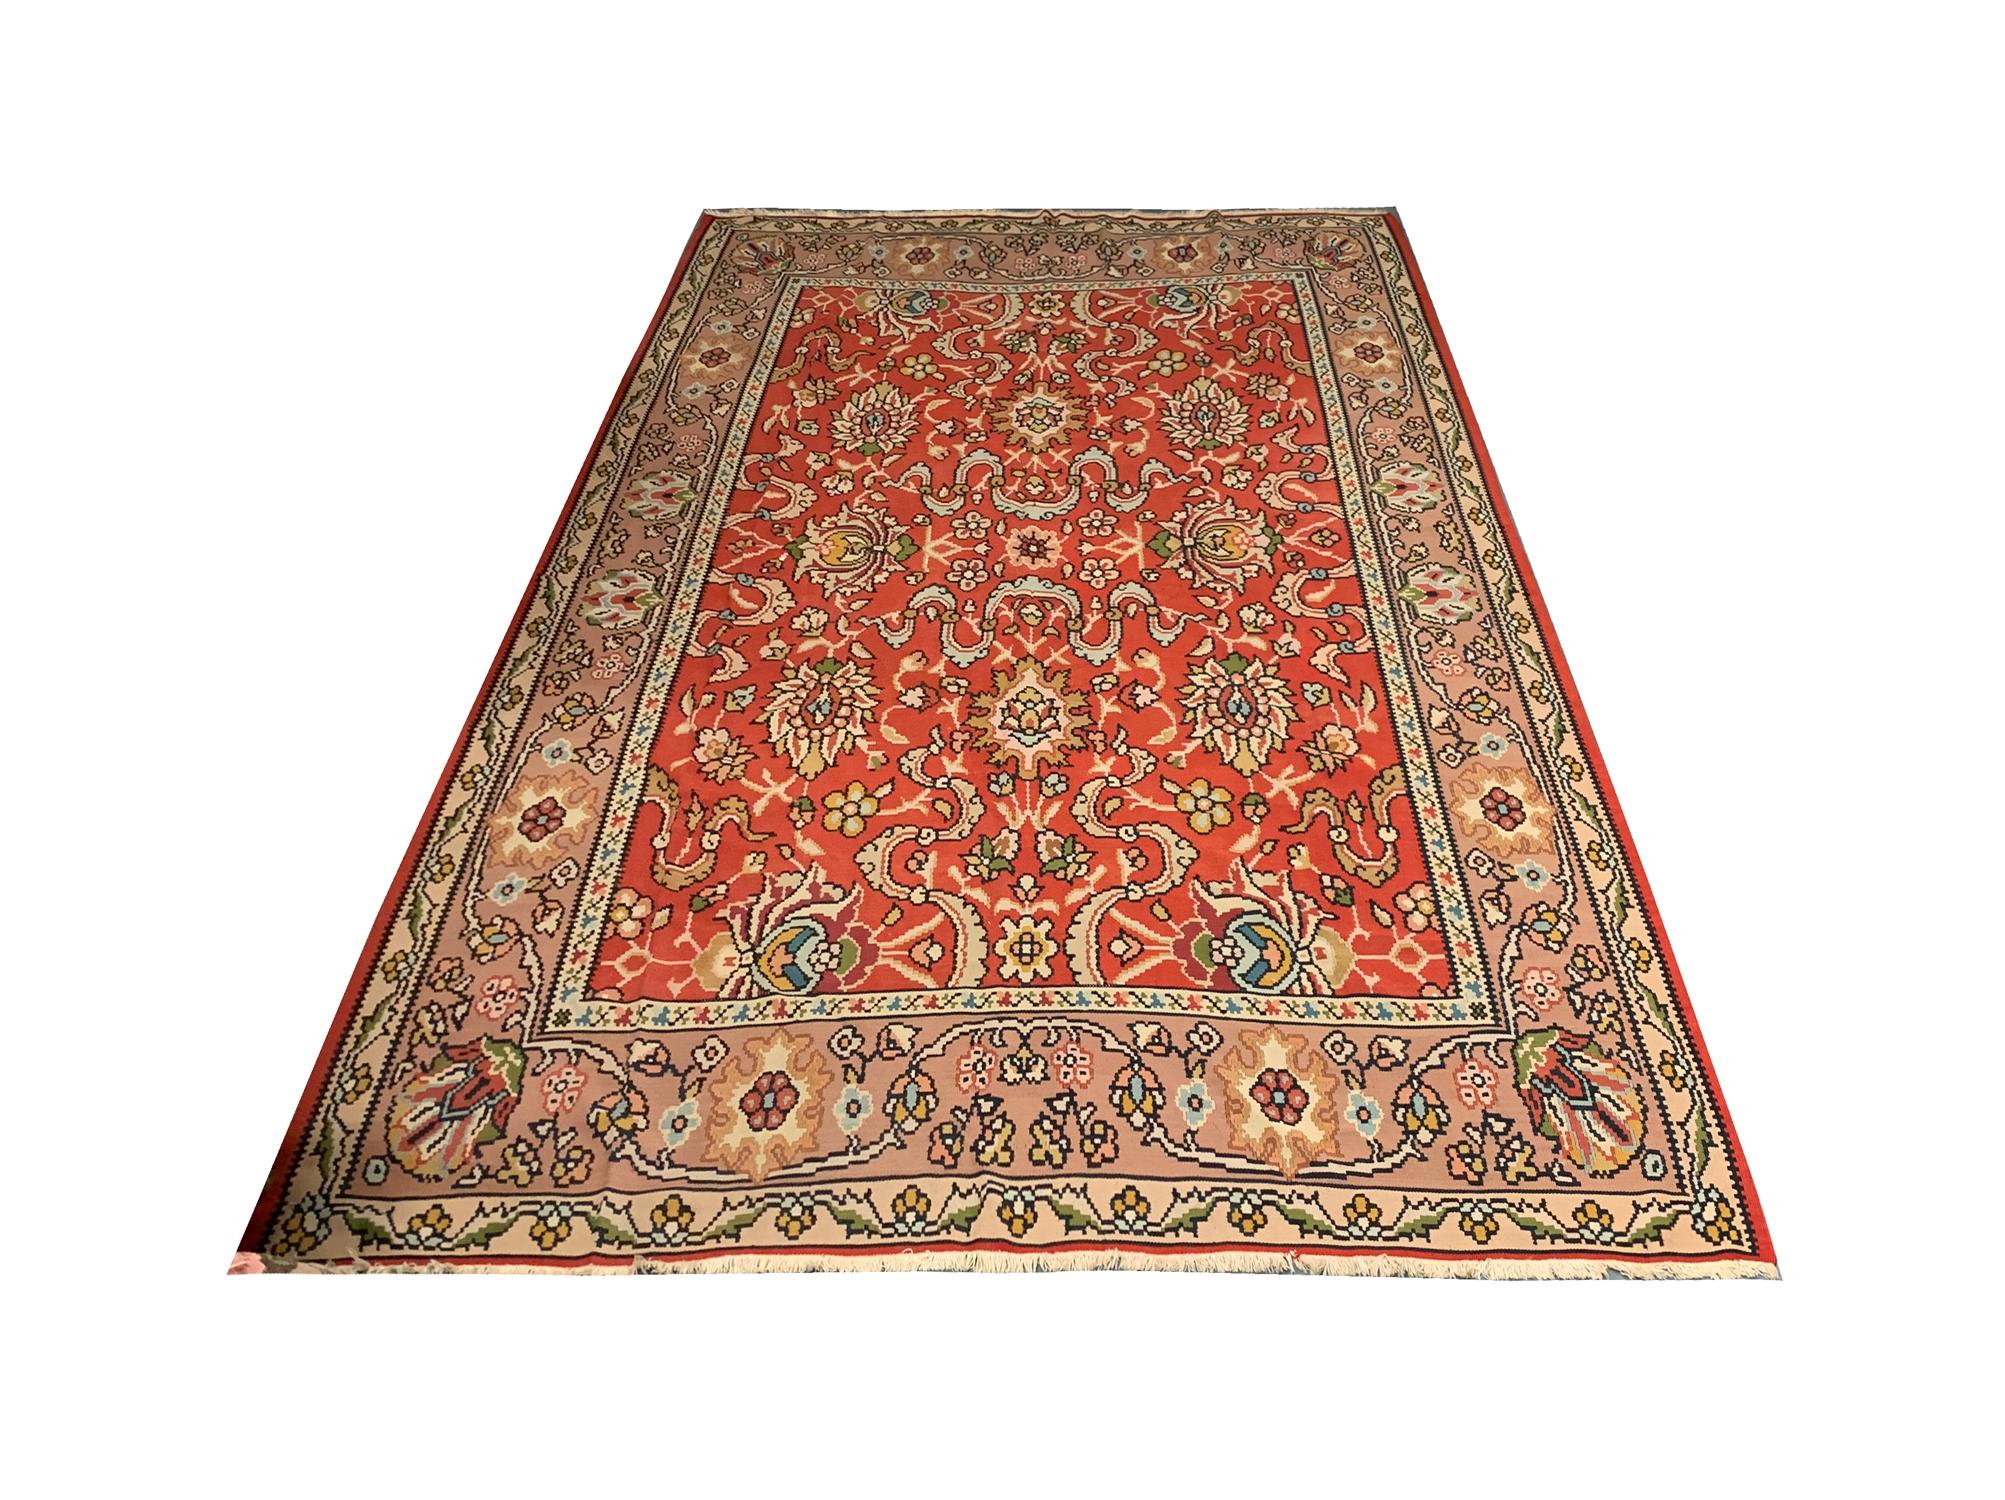 This fine red wool antique carpet was woven by hand in Turkey, Anatolia, in the 1930s. The central design features a symmetrical all over design woven with floral patterns. Intricately designed and constructed with fine hand-spun wool and cotton.